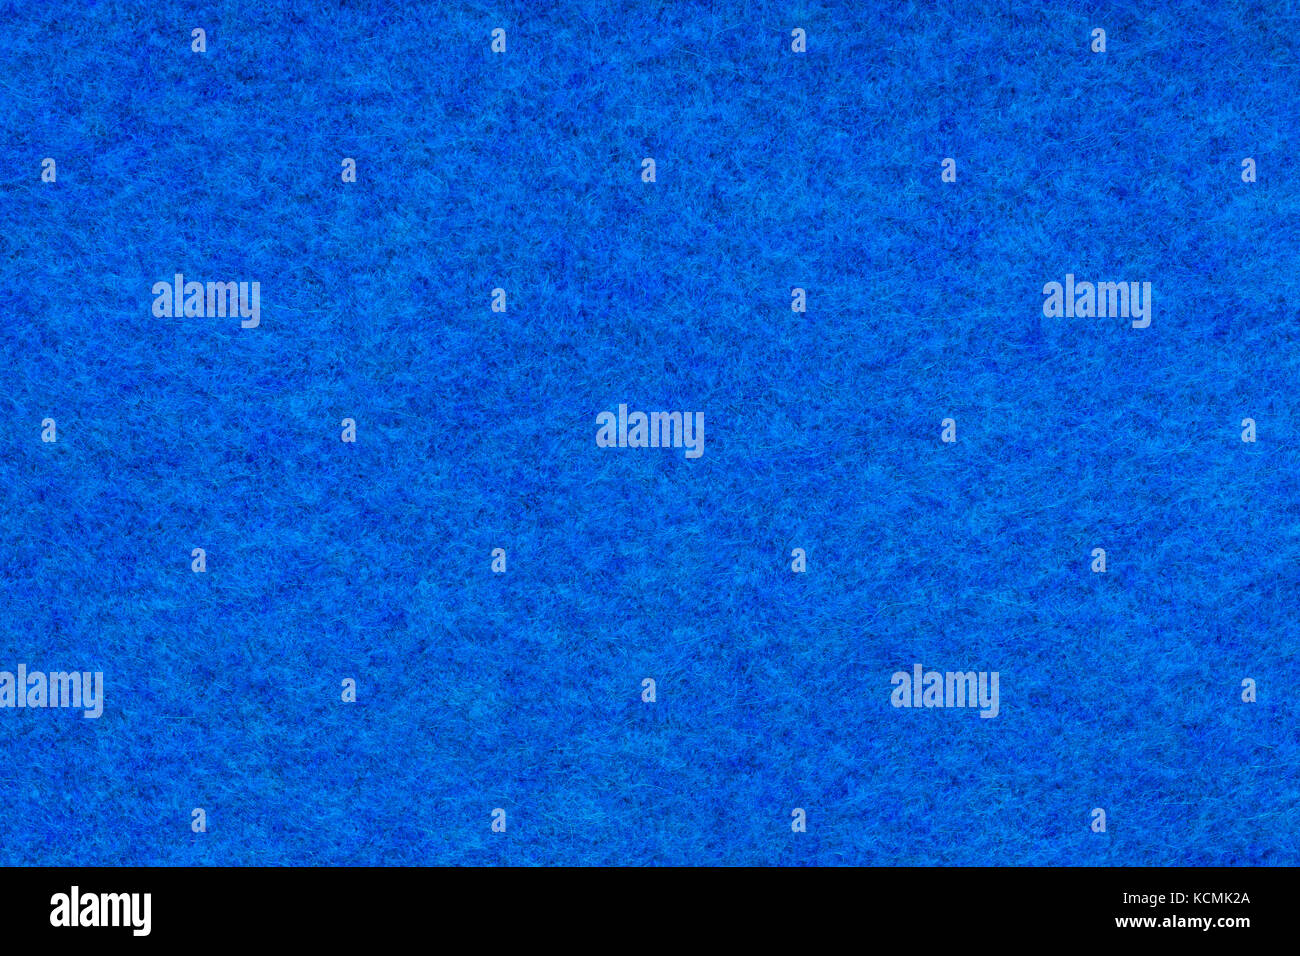 Melange Color High Resolution Stock Photography And Images Alamy Completely free and completely online. https www alamy com stock image background and texture of melange fuzzy woolen cloth of blue color 162723186 html